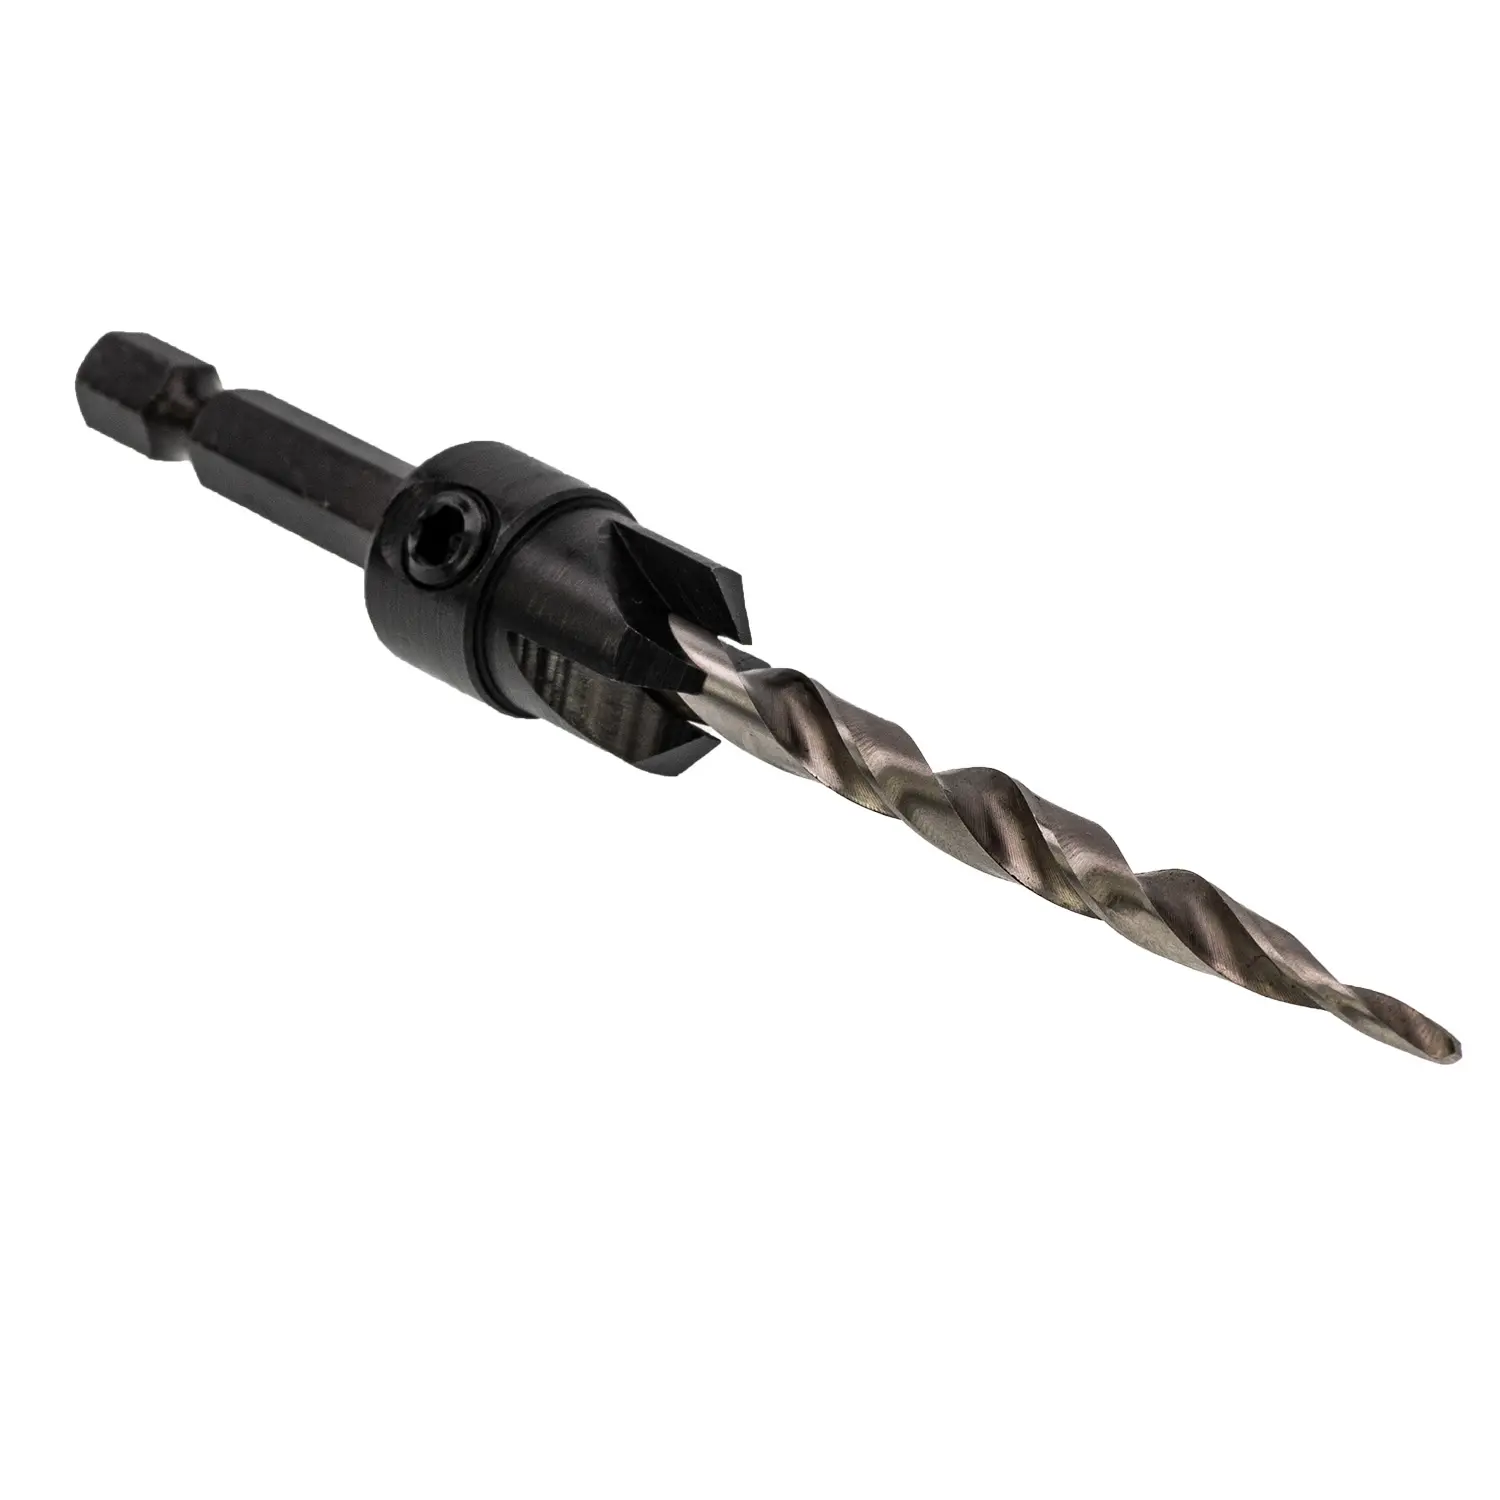 BOMI BMV-7 Hot Sale Din338 Hss Taper Point Drill Bit with countersink for Wood Work Drilling